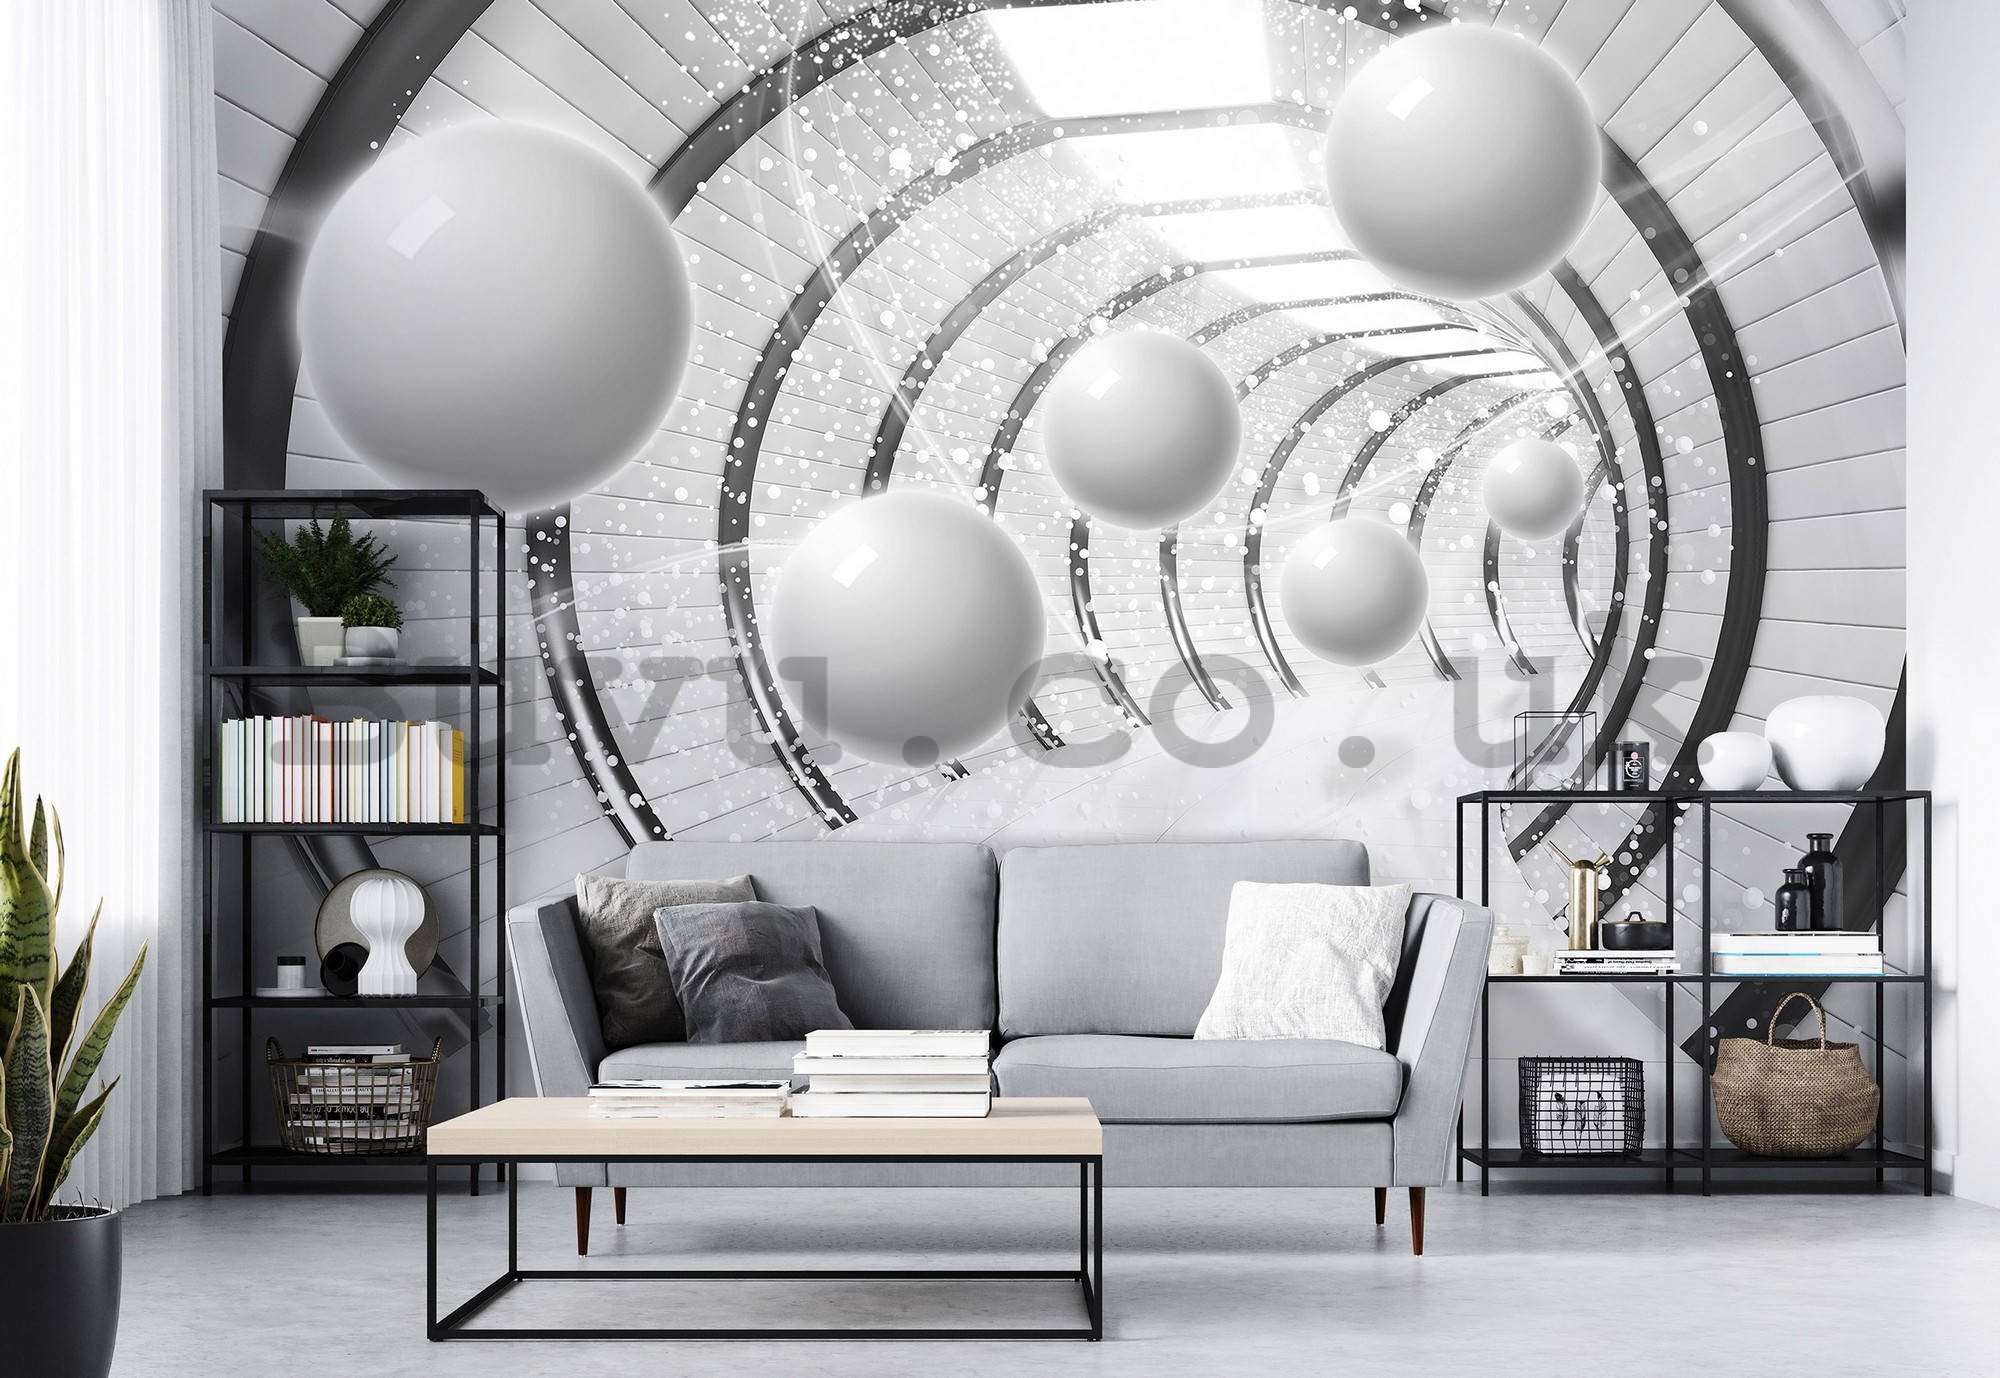 Wall mural vlies: Spheres in the tunnel - 152,5x104 cm